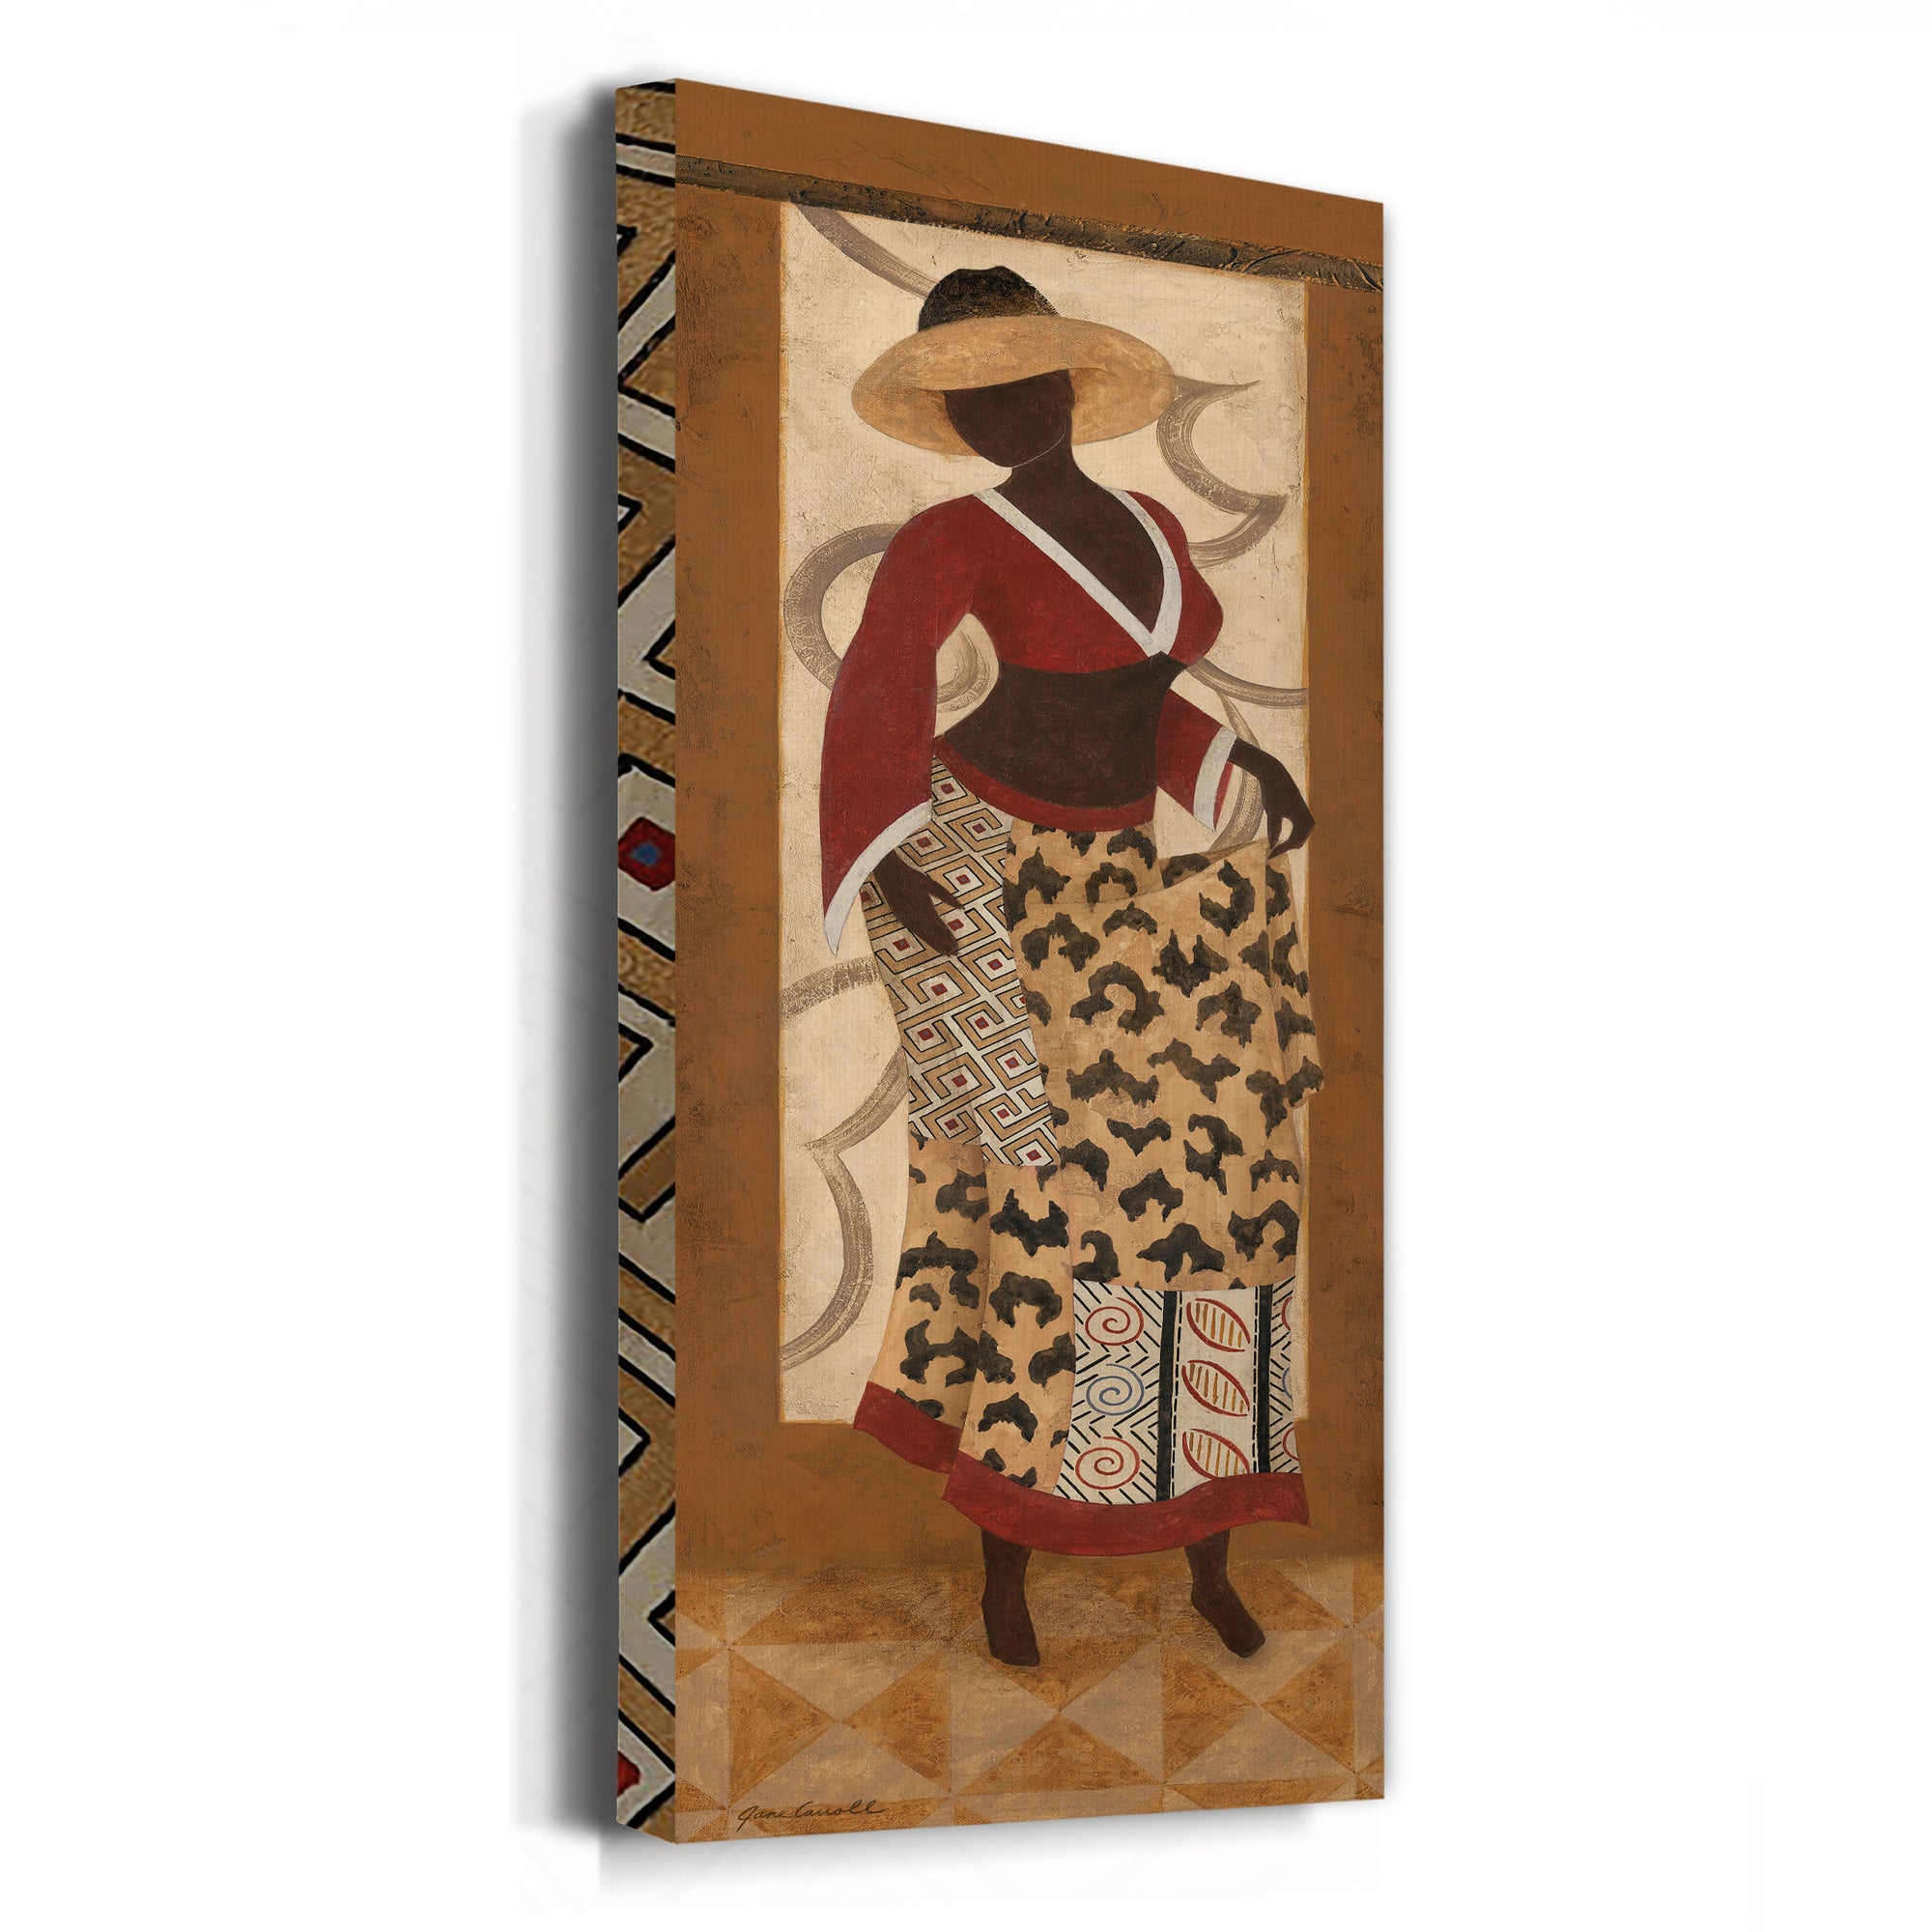 Forever Chic I - Premium Gallery Wrapped Canvas - Ready to Hang